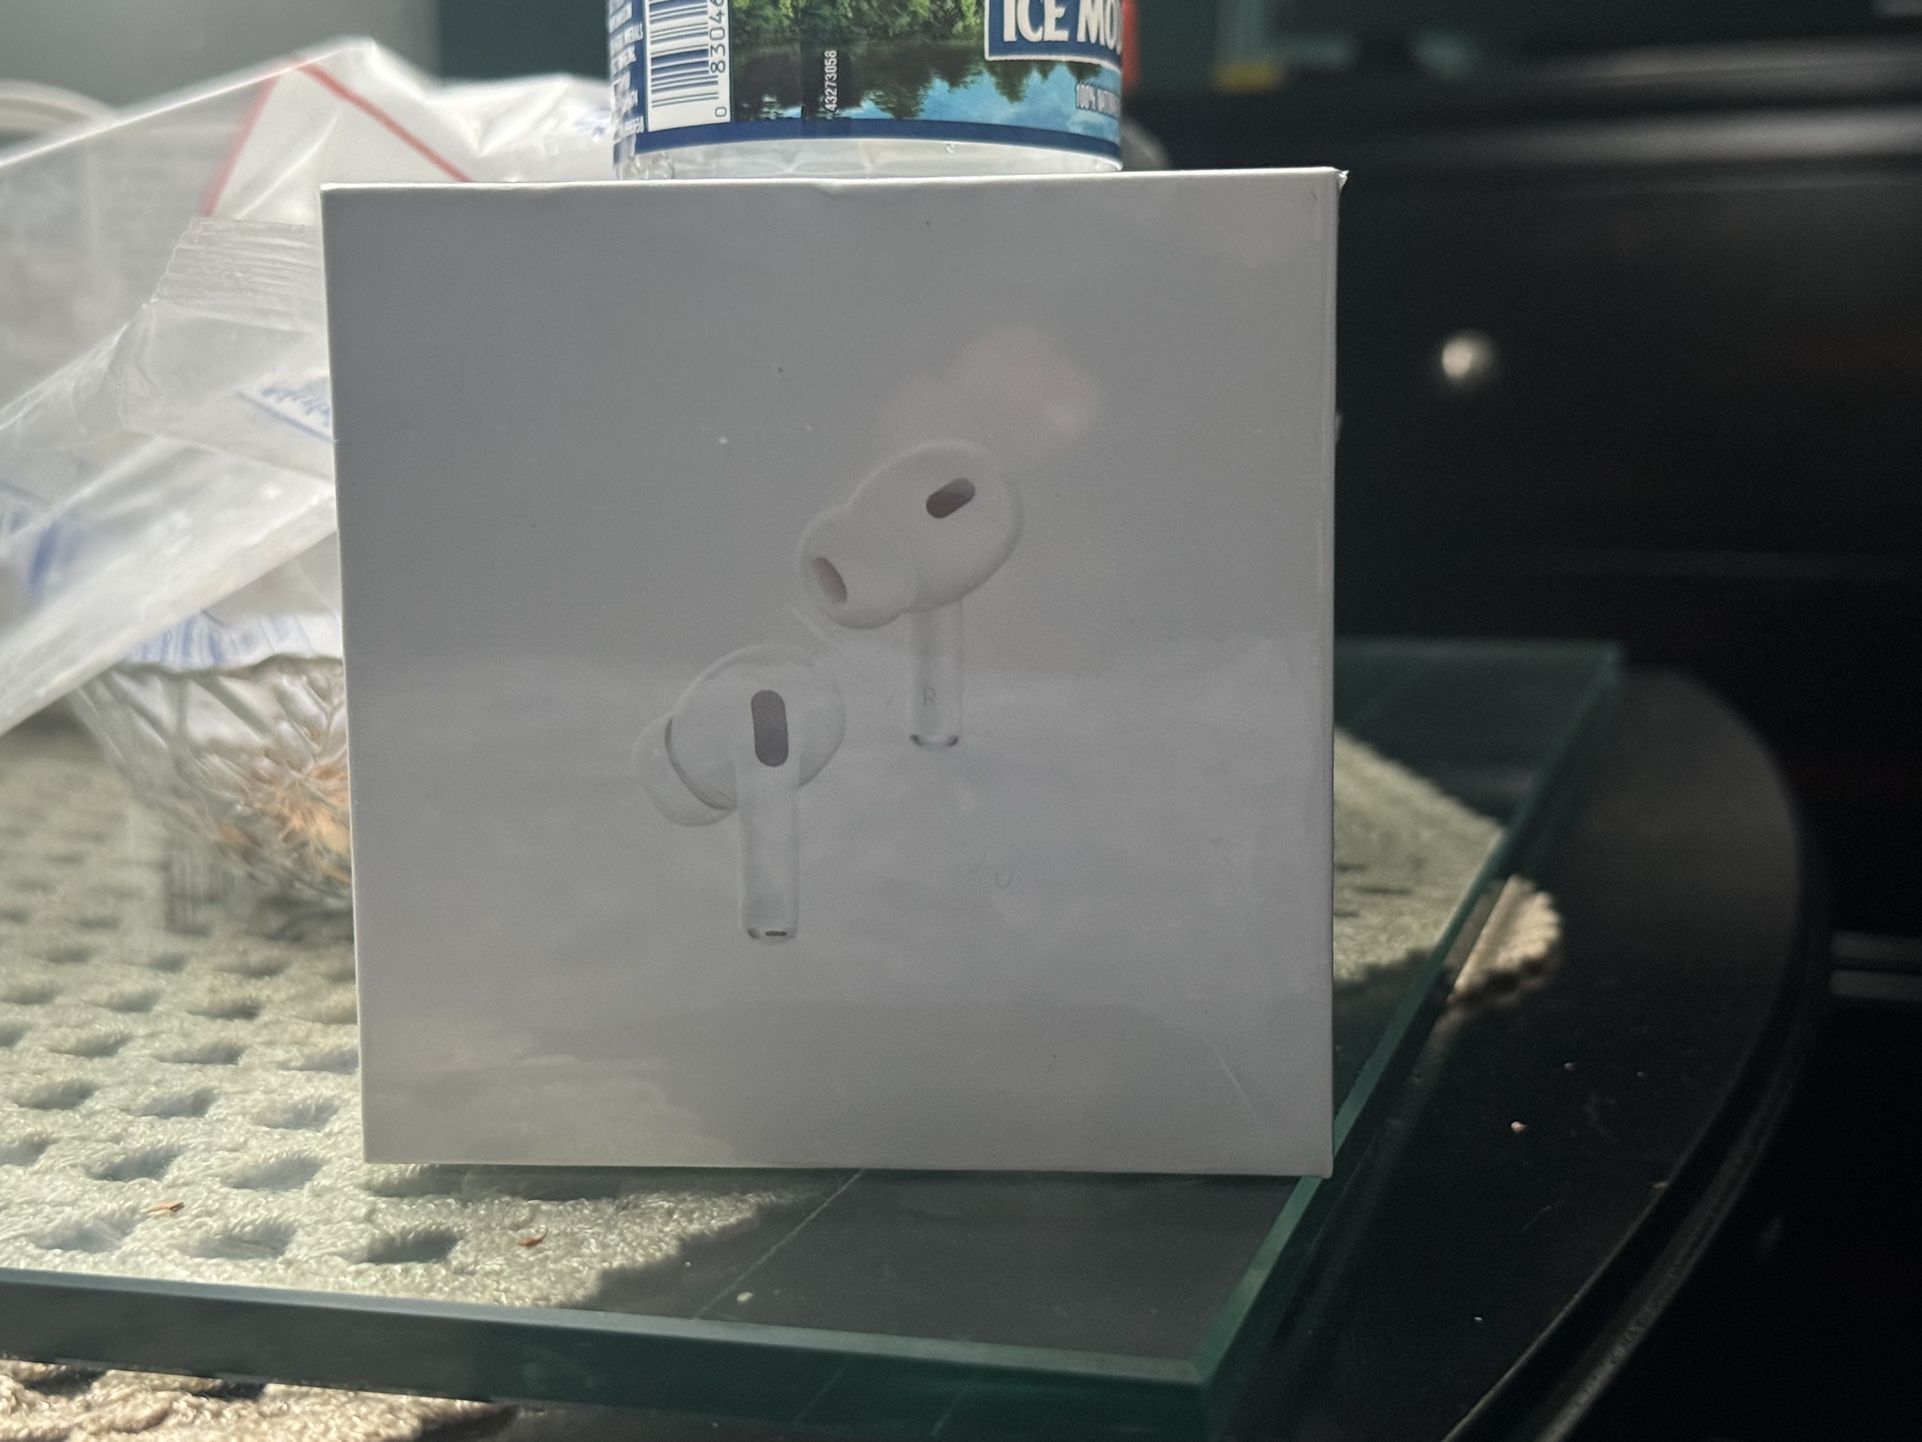 AirPods Pros 2 